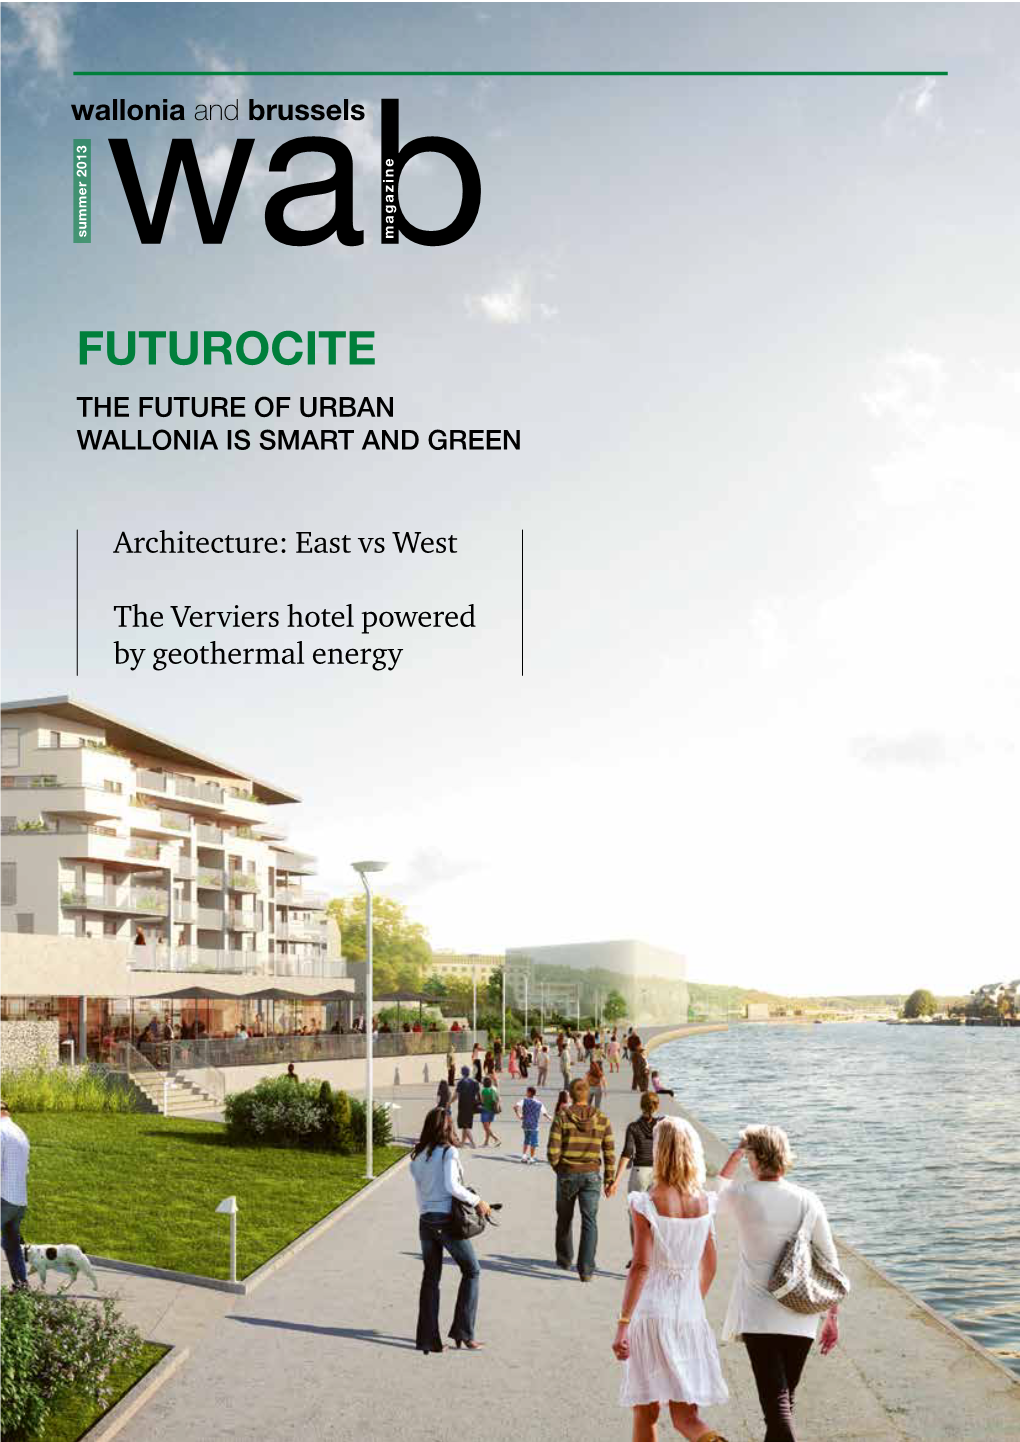 FUTUROCITE Summer 2013 by Energy Geothermal the Verviers Hotel Powered Architecture: West East Vs T URE OFURBAN T ANDGREEN